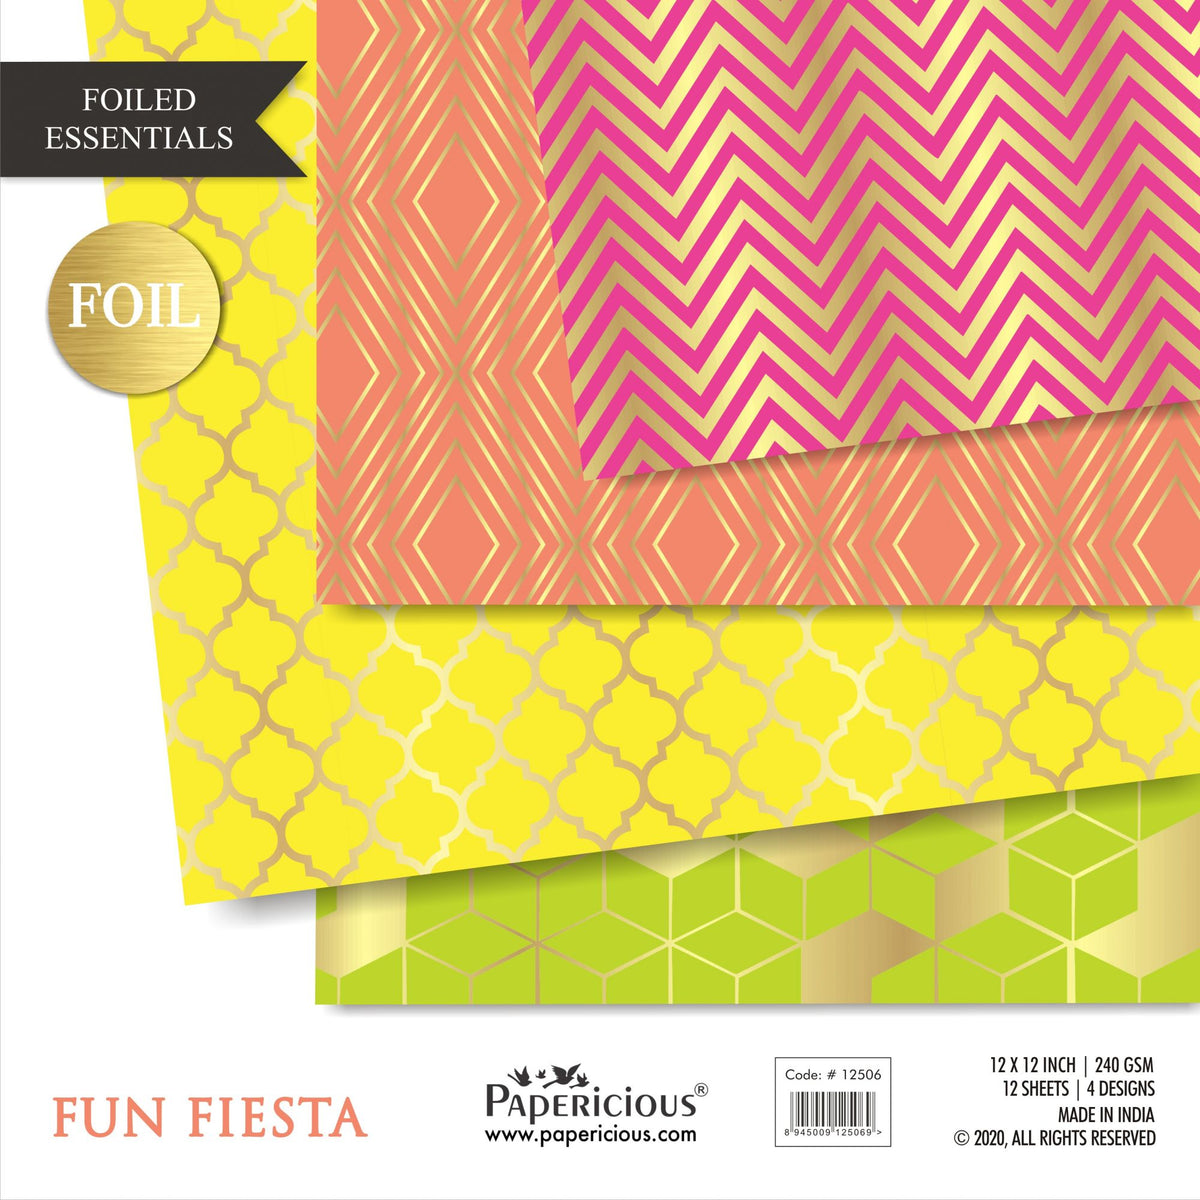 Papericious - Fun Fiesta - Golden Foiled Pattern Scrapbook Papers 12x12 inch / 12 sheets